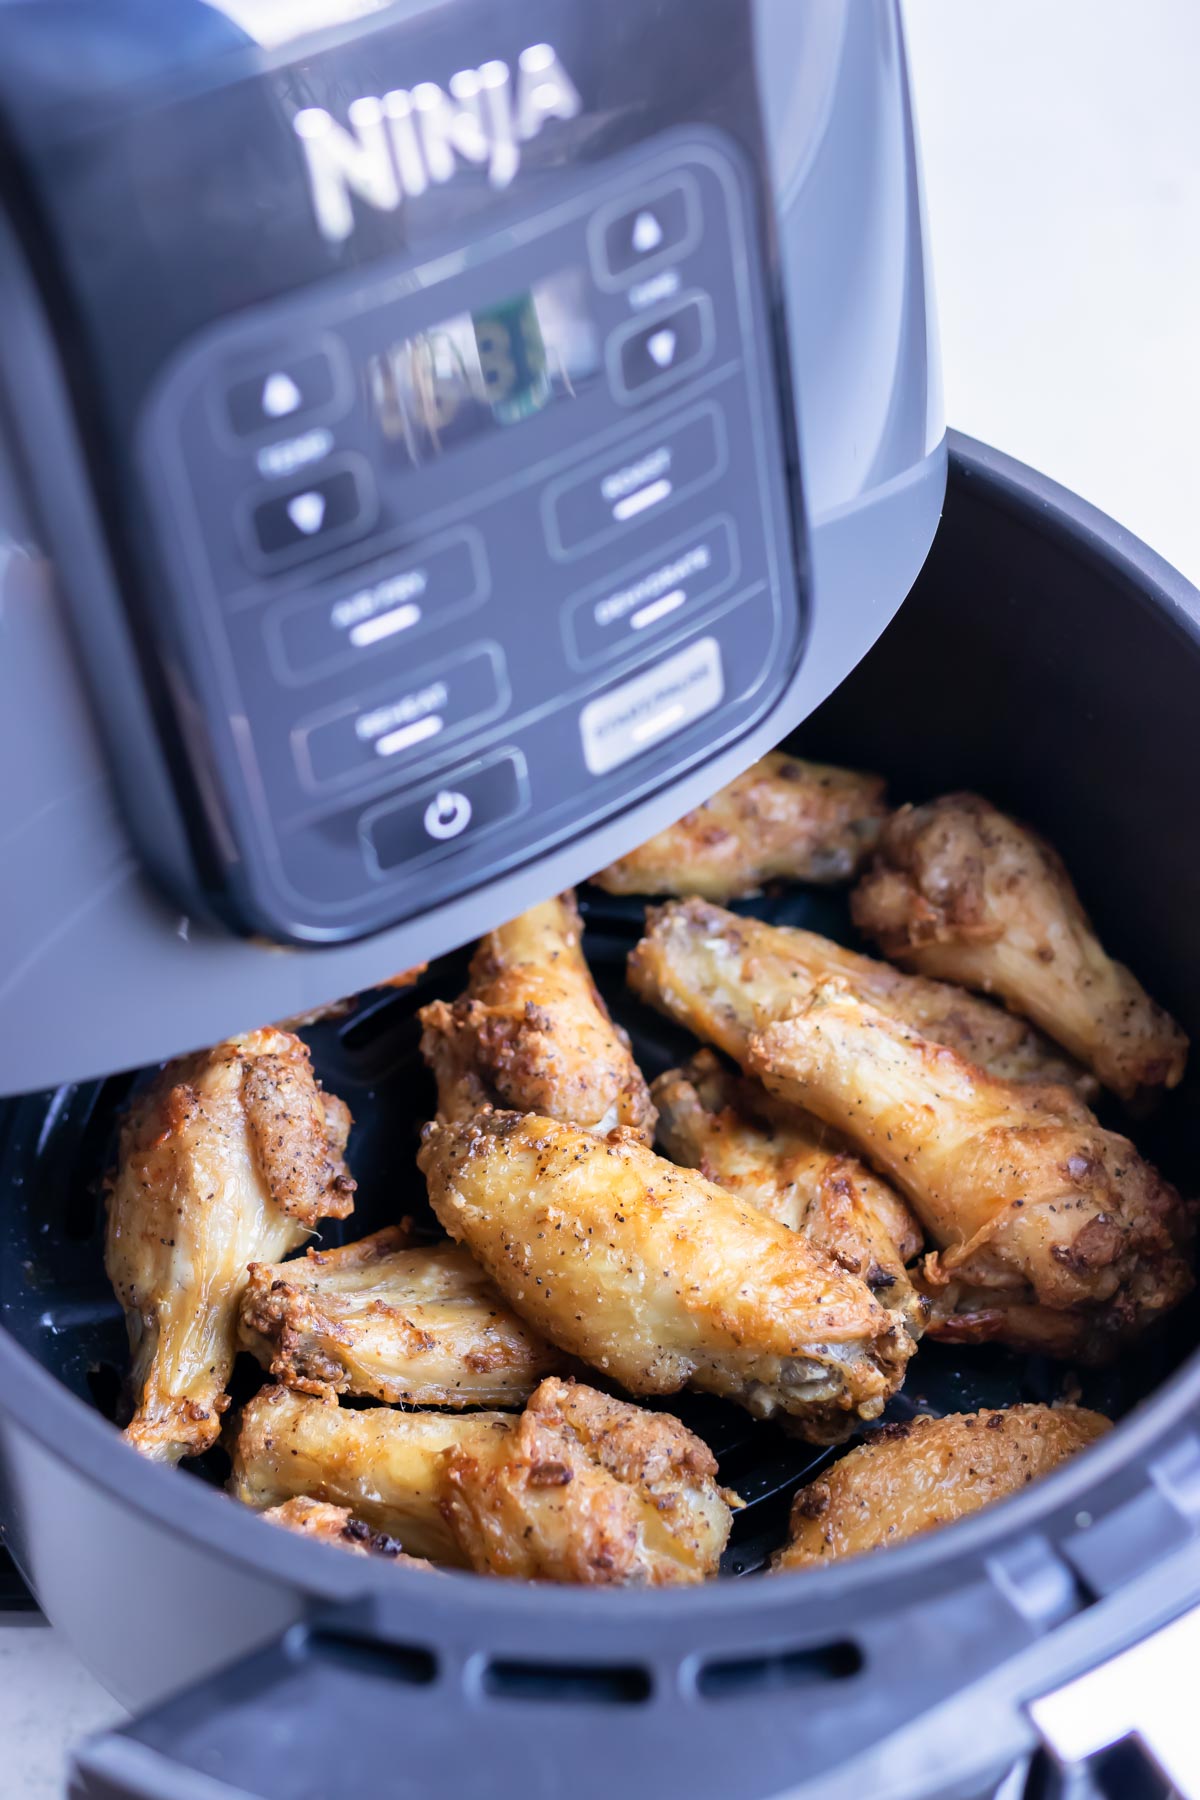 Crispy chicken wings are cooked in a Ninja air fryer.